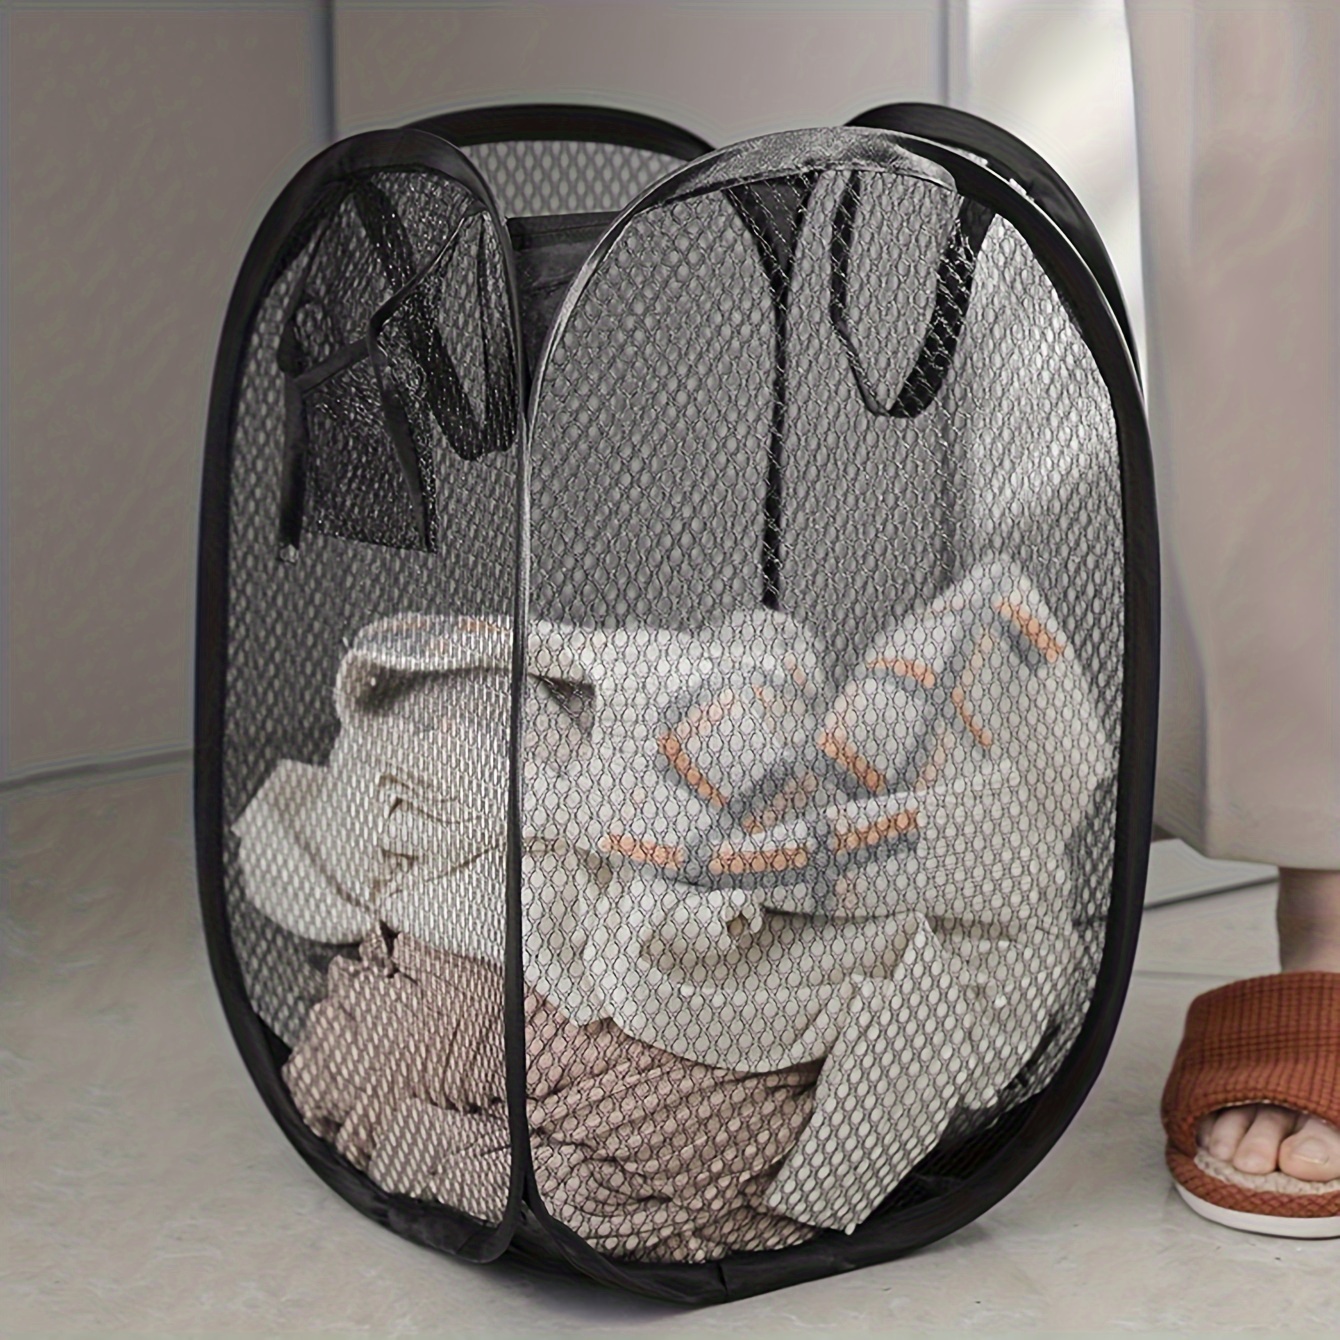 

Extra-large Pop-up Laundry Hamper With Handles - Foldable Mesh Basket For Easy Dirty Clothes Storage, Essential Home Organizer Laundry Basket Hampers For Laundry